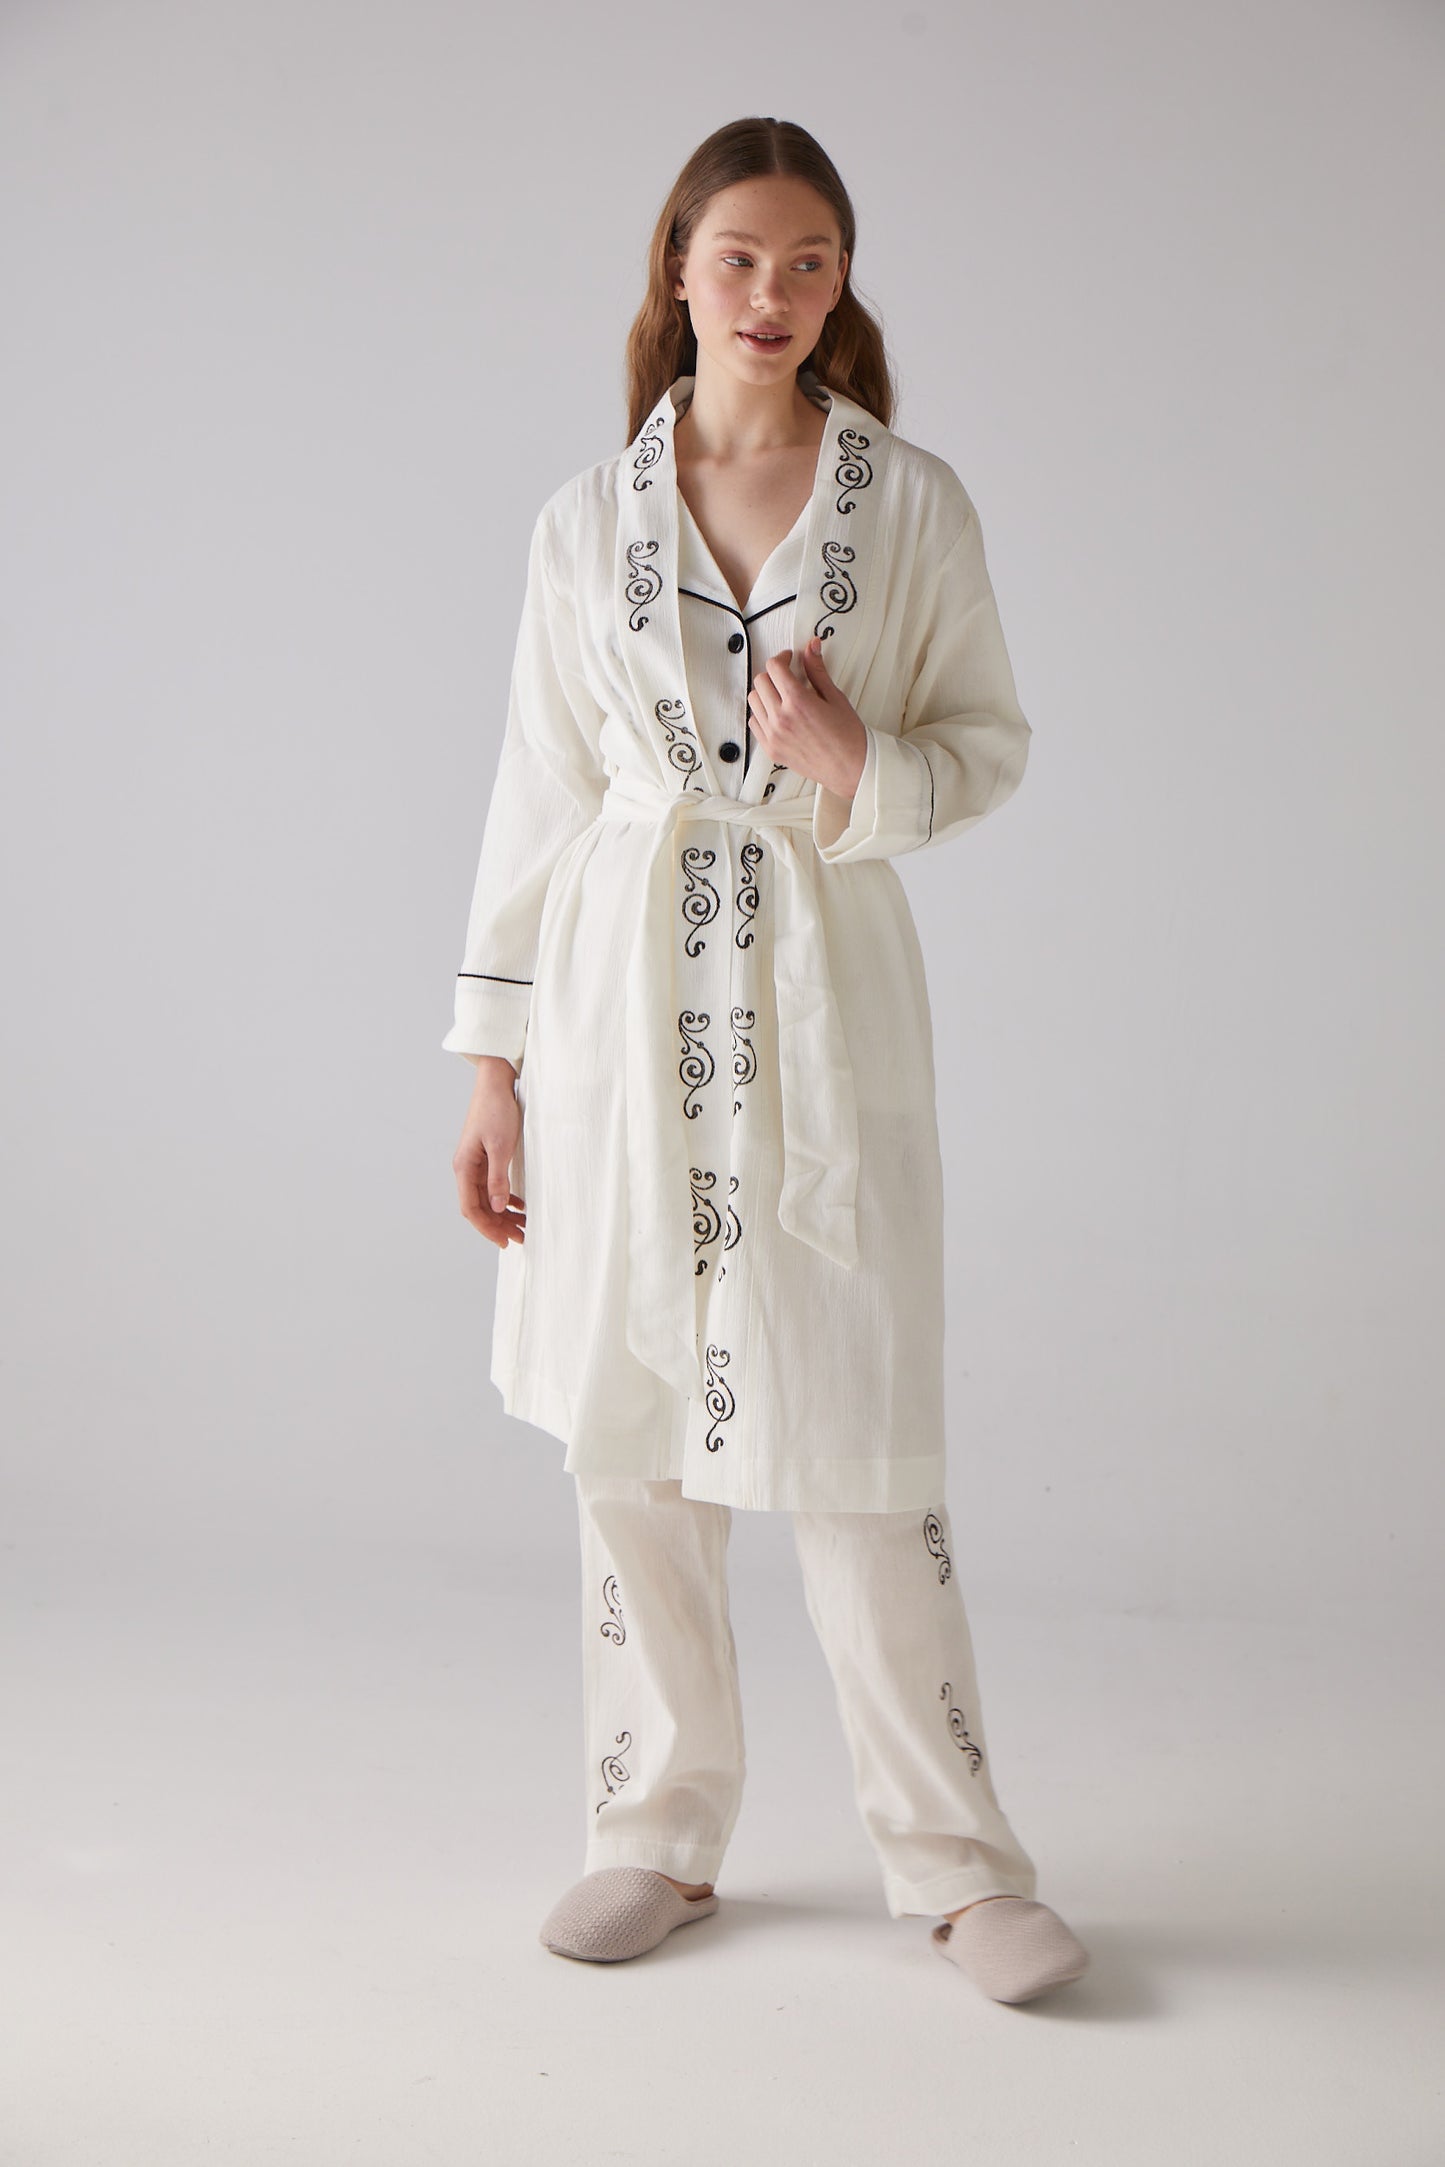 Clef woodcut patterned Morning-gown in white 100% organic cotton